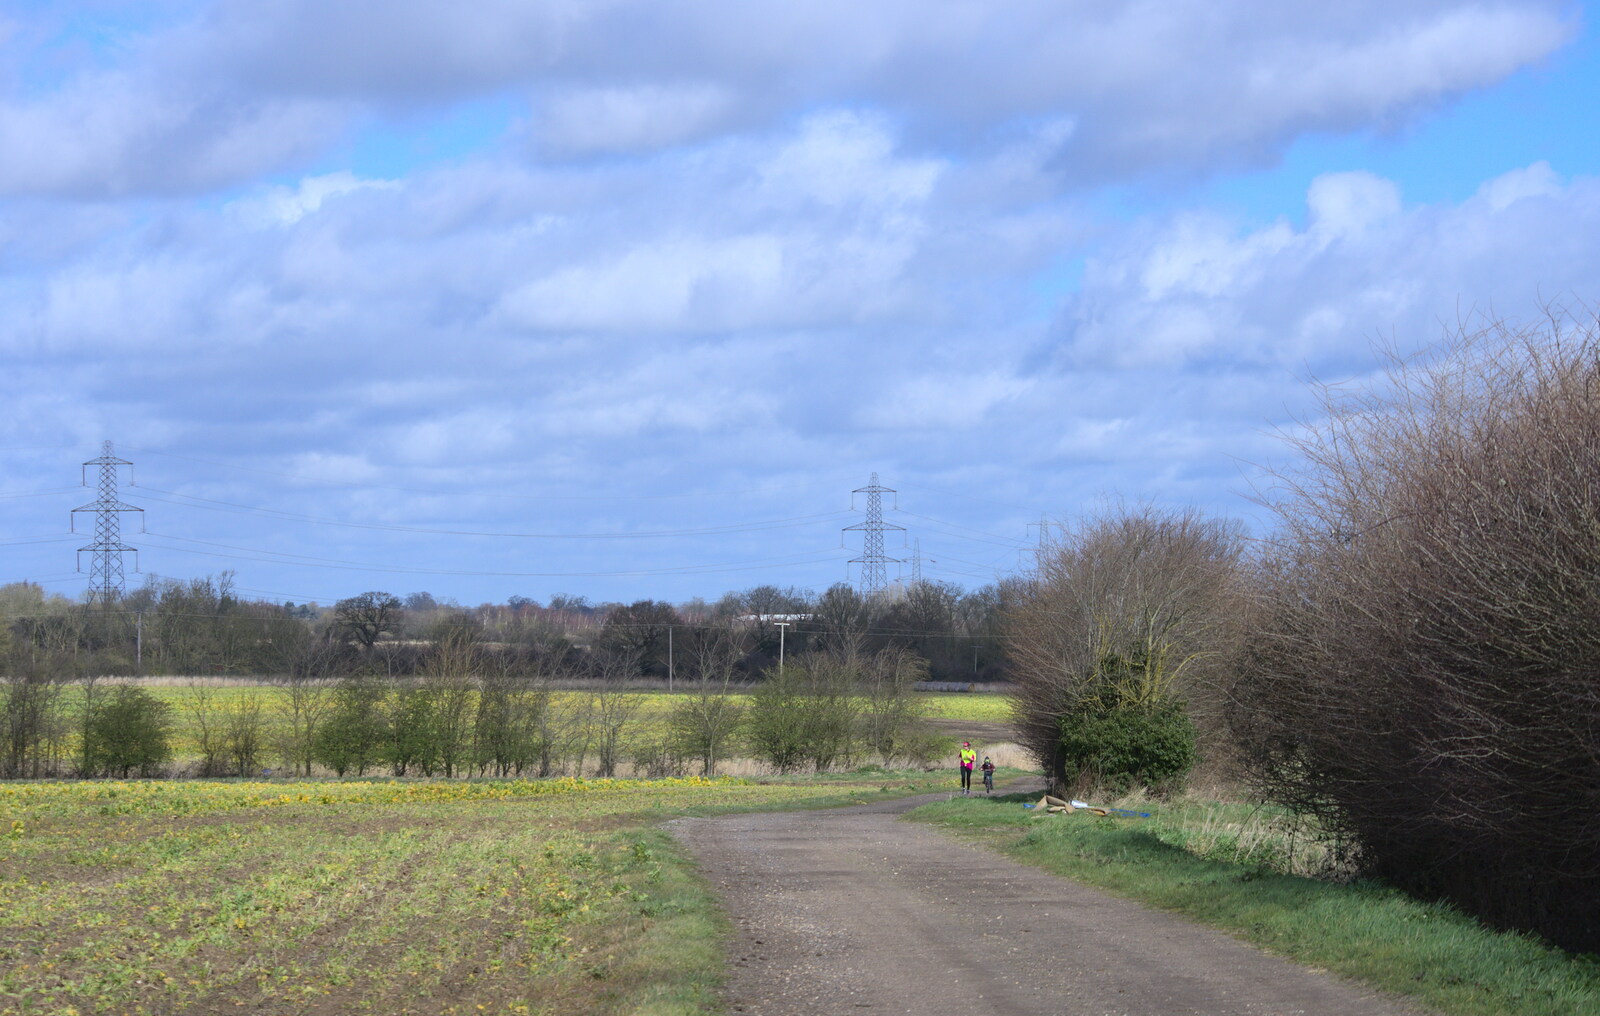 Isobel and Fred in the distance from Harry's Birthday, Brome, Suffolk - 28th March 2016